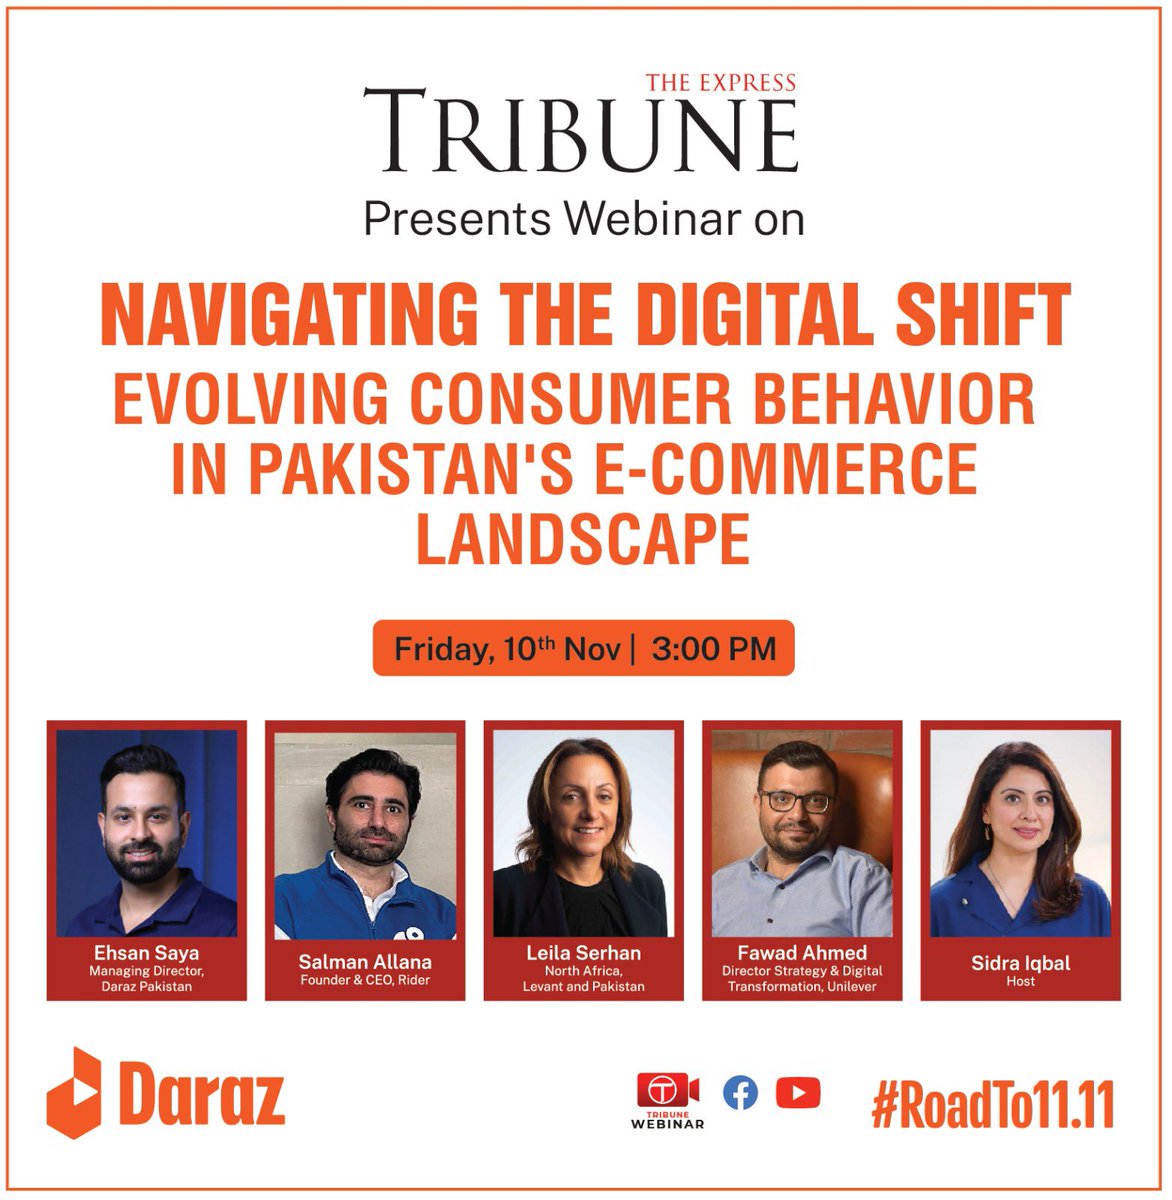 Don't miss out on Tribune's webinar – unlocking the secrets of Pakistan's e-commerce metamorphosis. Gain a 360° view of changing consumer behavior and the digital revolution.
#DigitalShift